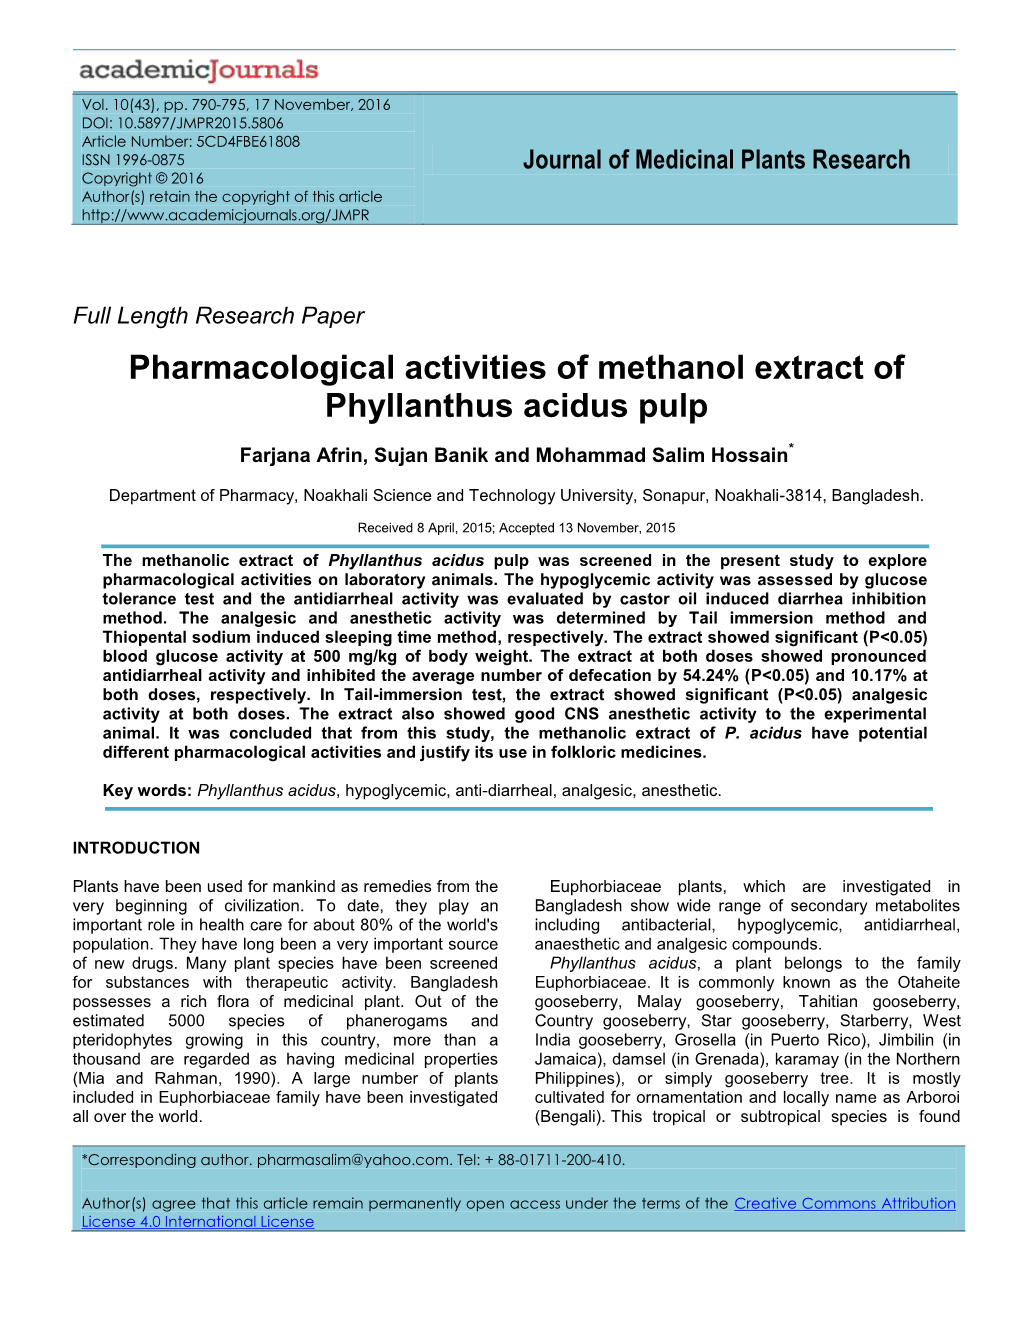 Pharmacological Activities of Methanol Extract of Phyllanthus Acidus Pulp